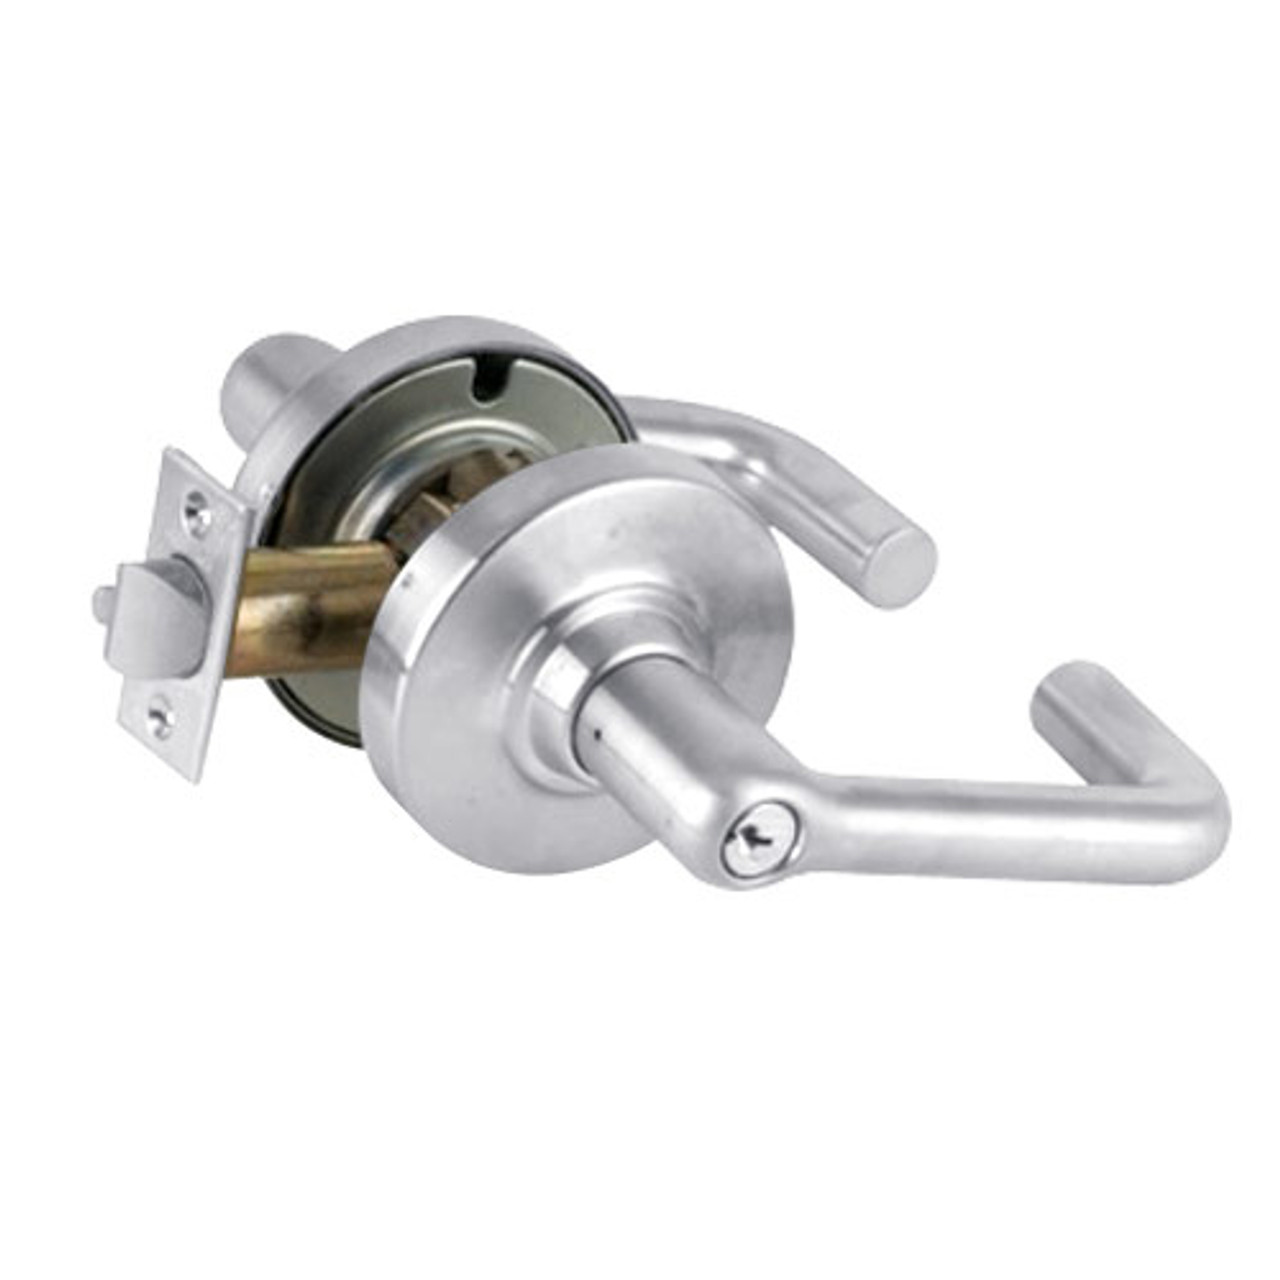 ND53PD-TLR-625 Schlage Tubular Cylindrical Lock in Bright Chromium Plated